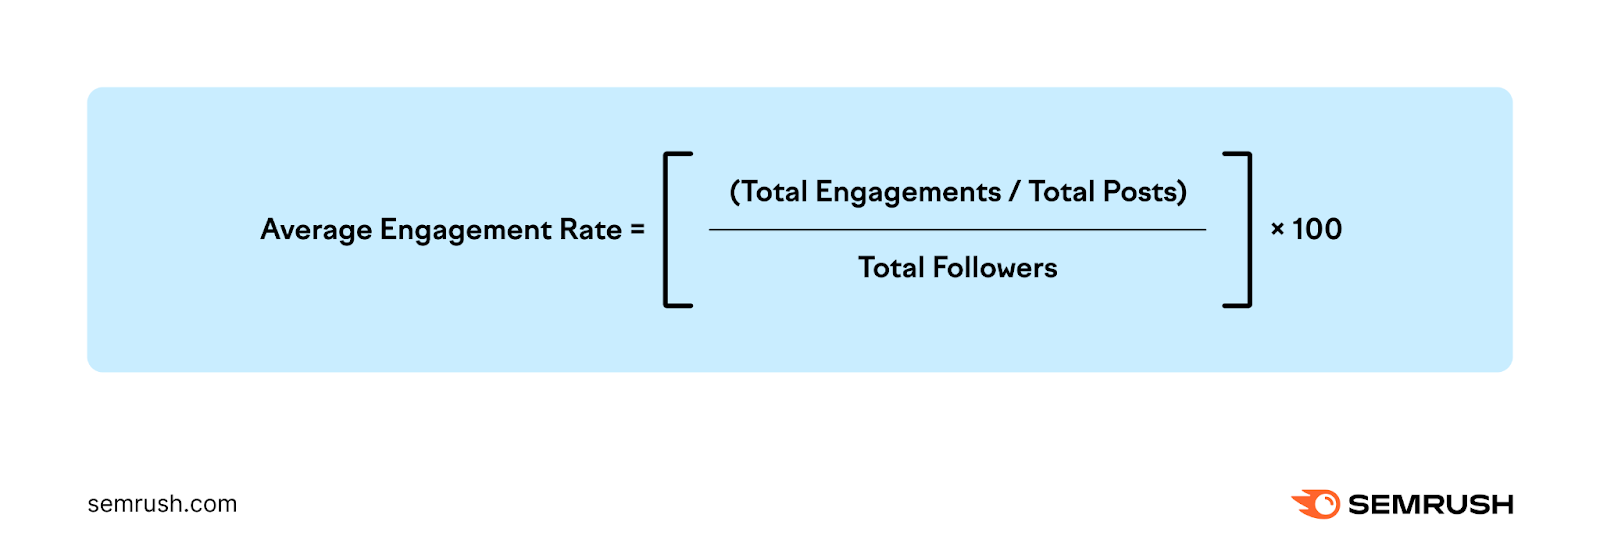 an image showing a formula for how the average engagement rate is calculated